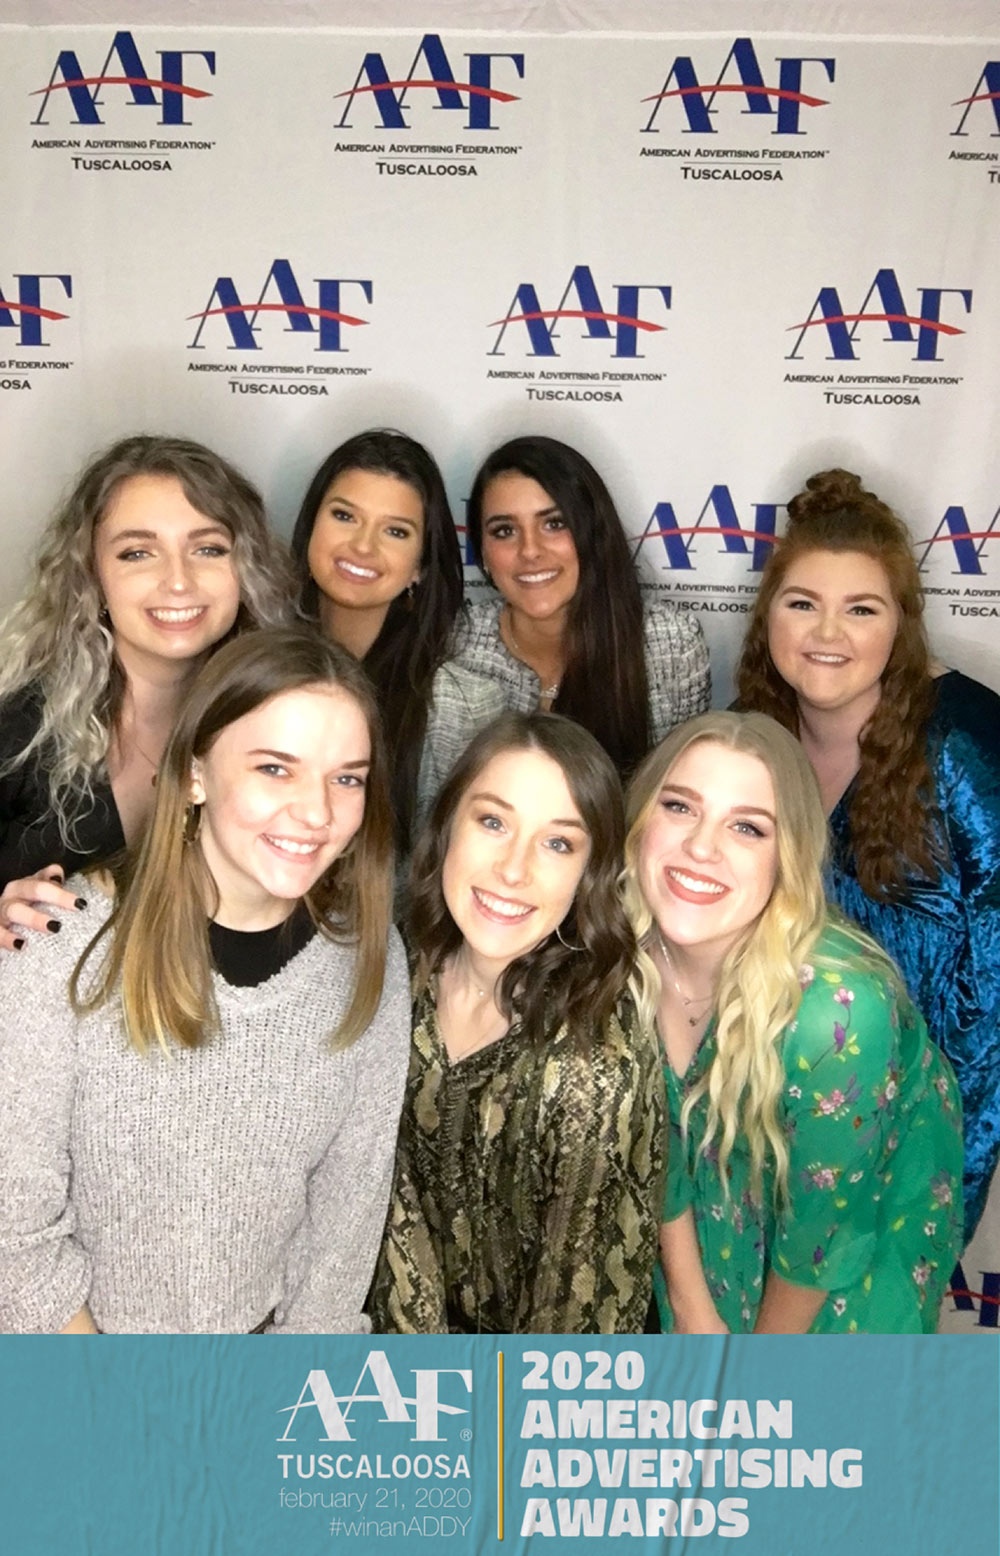 students posing in front of AAF backdrop: Back row/left to right: Hannah Chapman, Maddie Rosenbaum, Morgan Pearce, Anna Claire Garrard; Front row/left to right: Amber McDonald, Savannah Alley, Meghan Norman